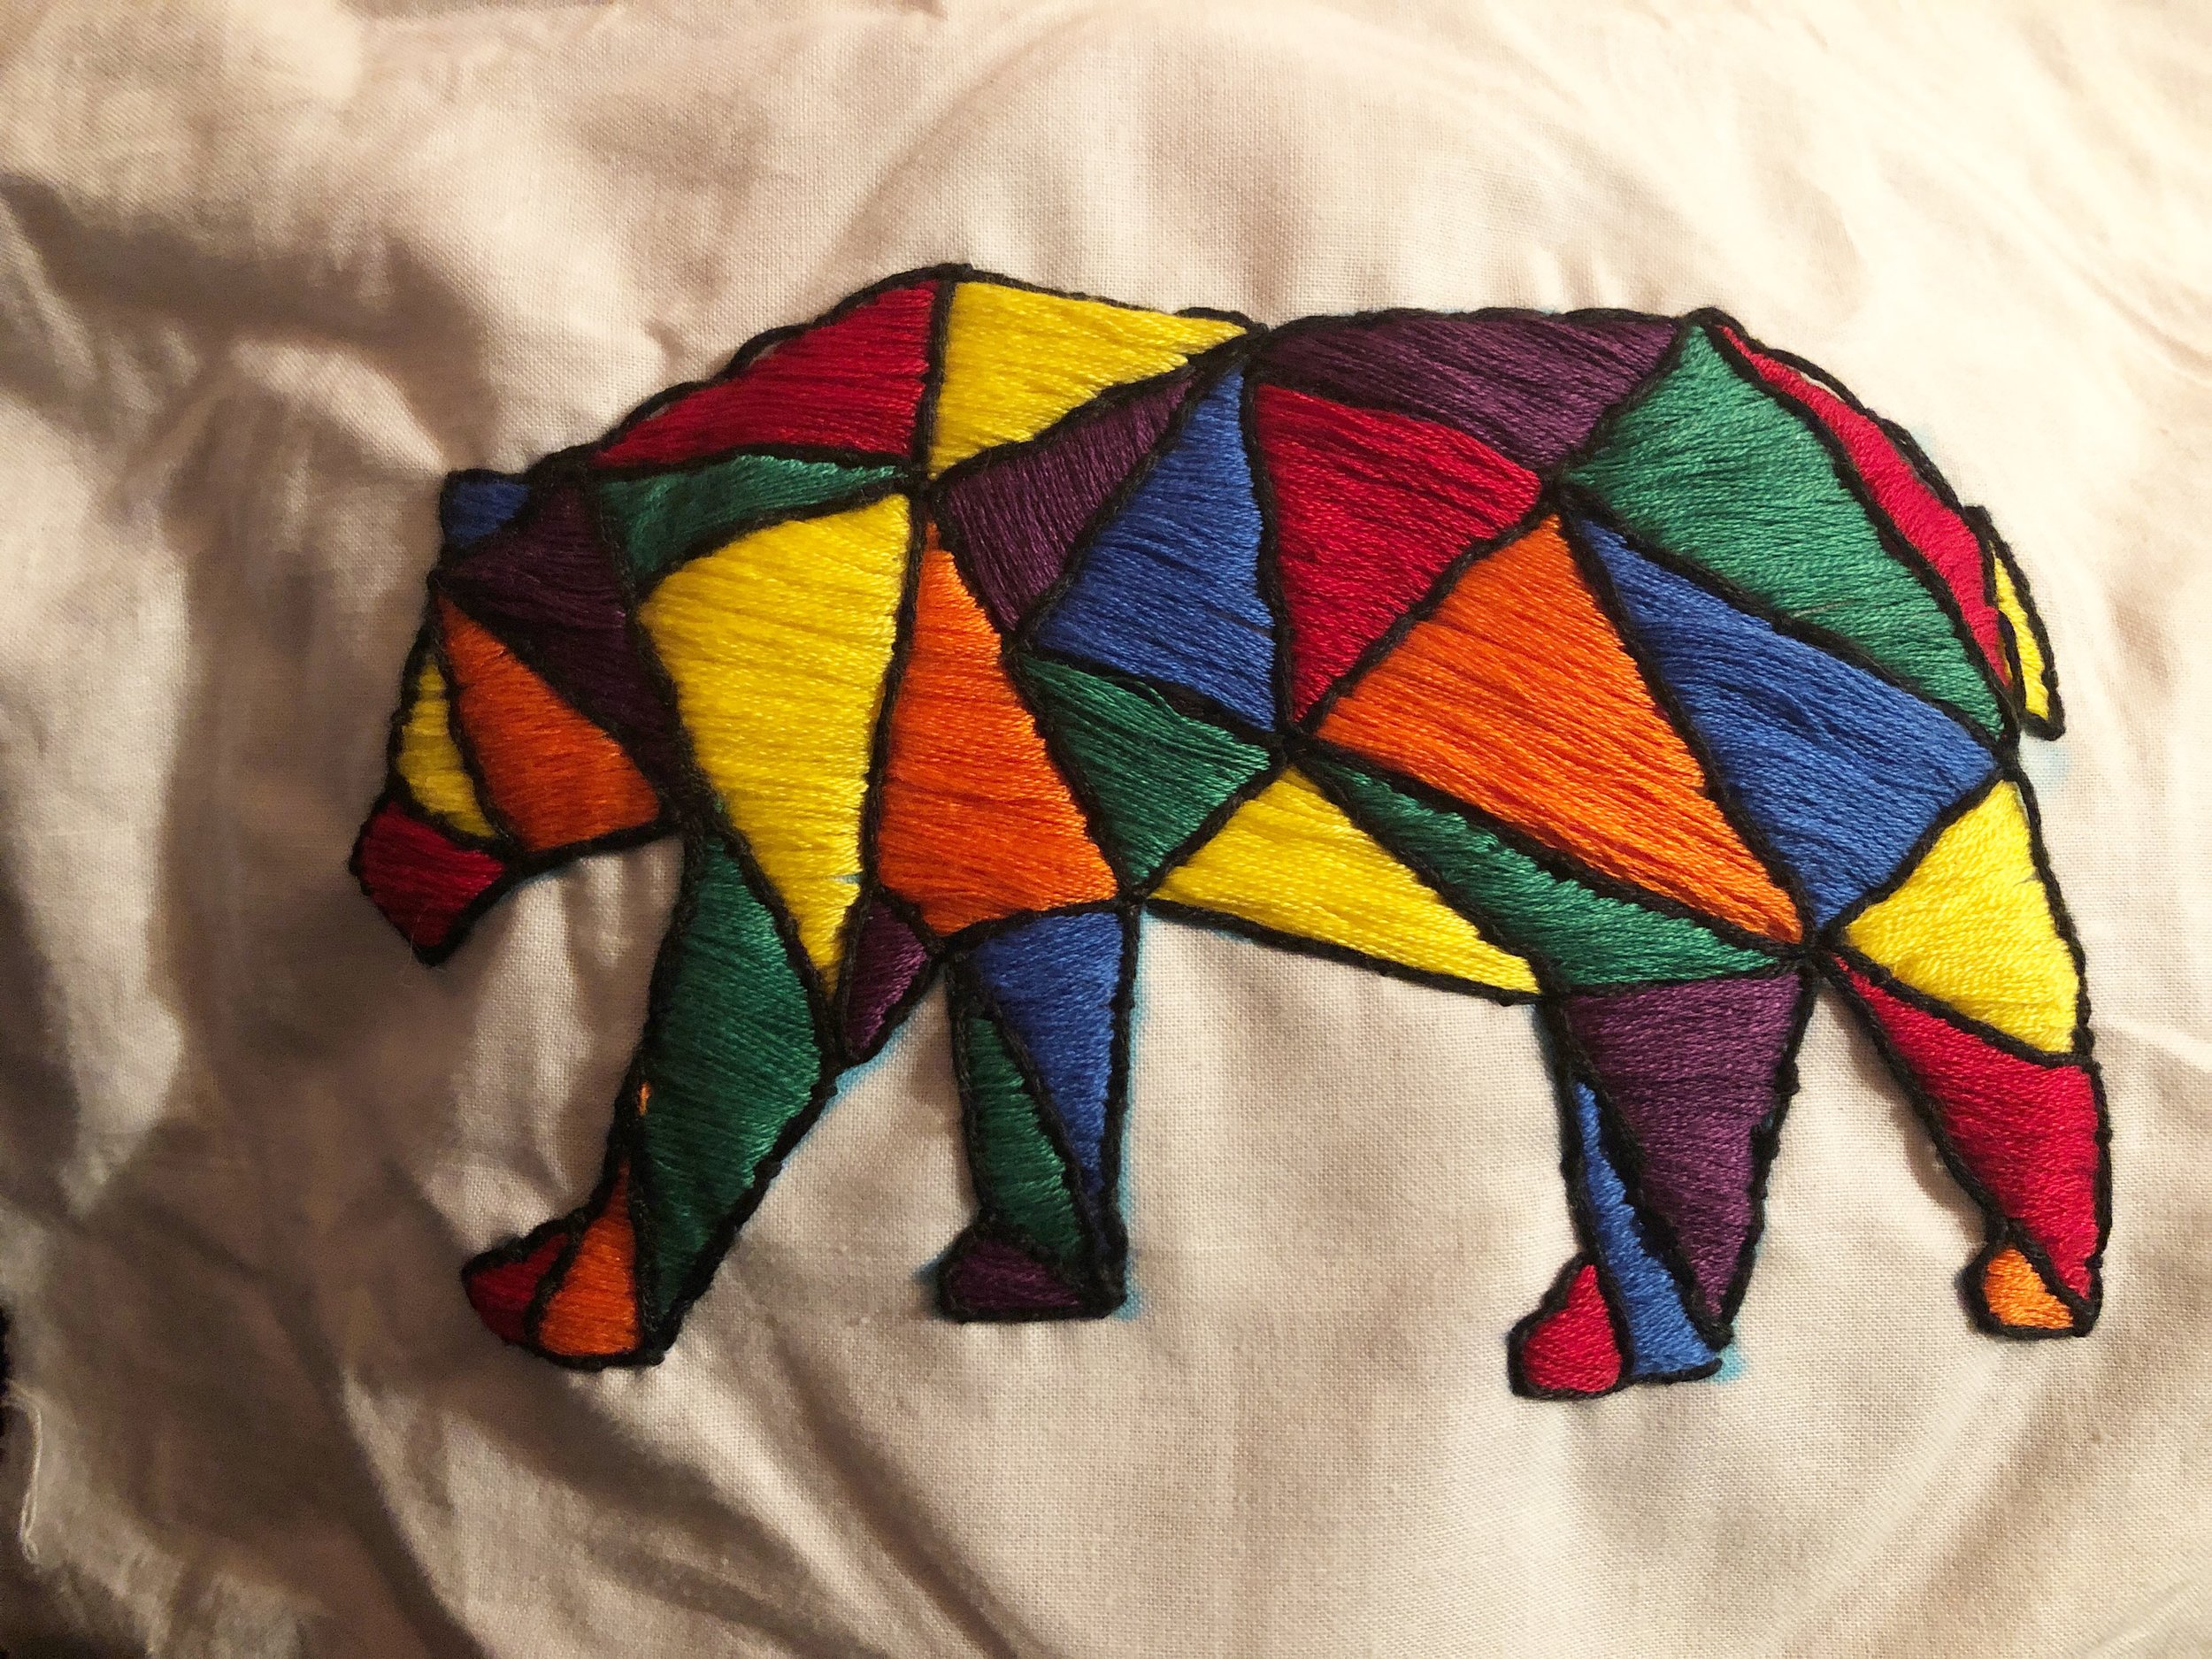 Second Embroidery Project